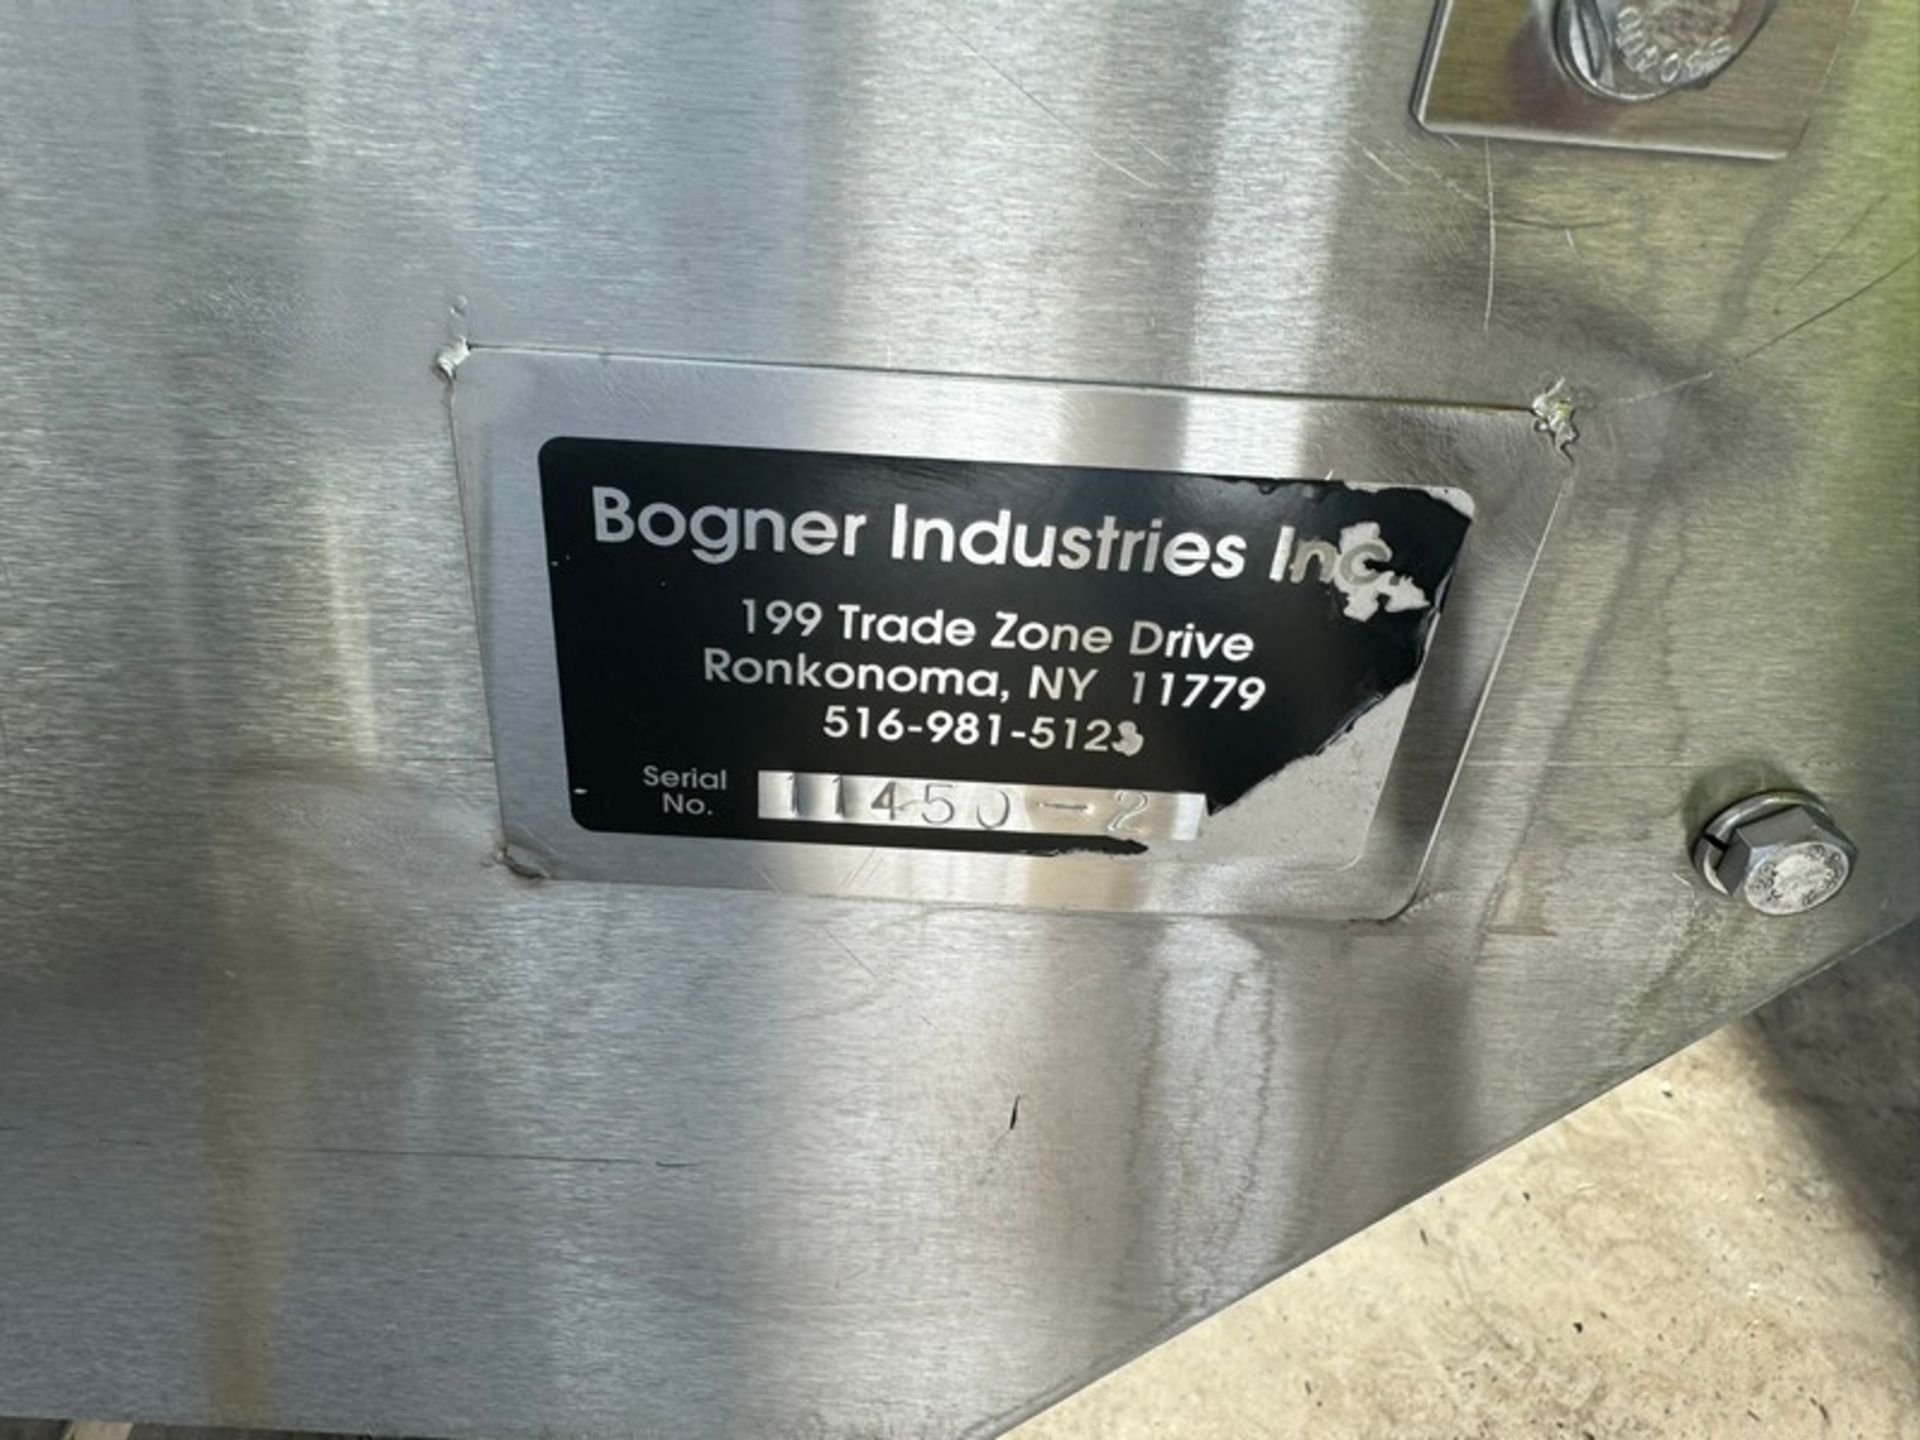 Bogner Industries Inc. Straight Section of Conveyor, Aprox. 15 ft. L x 18" W Belt x 35" H Belt to - Image 6 of 9